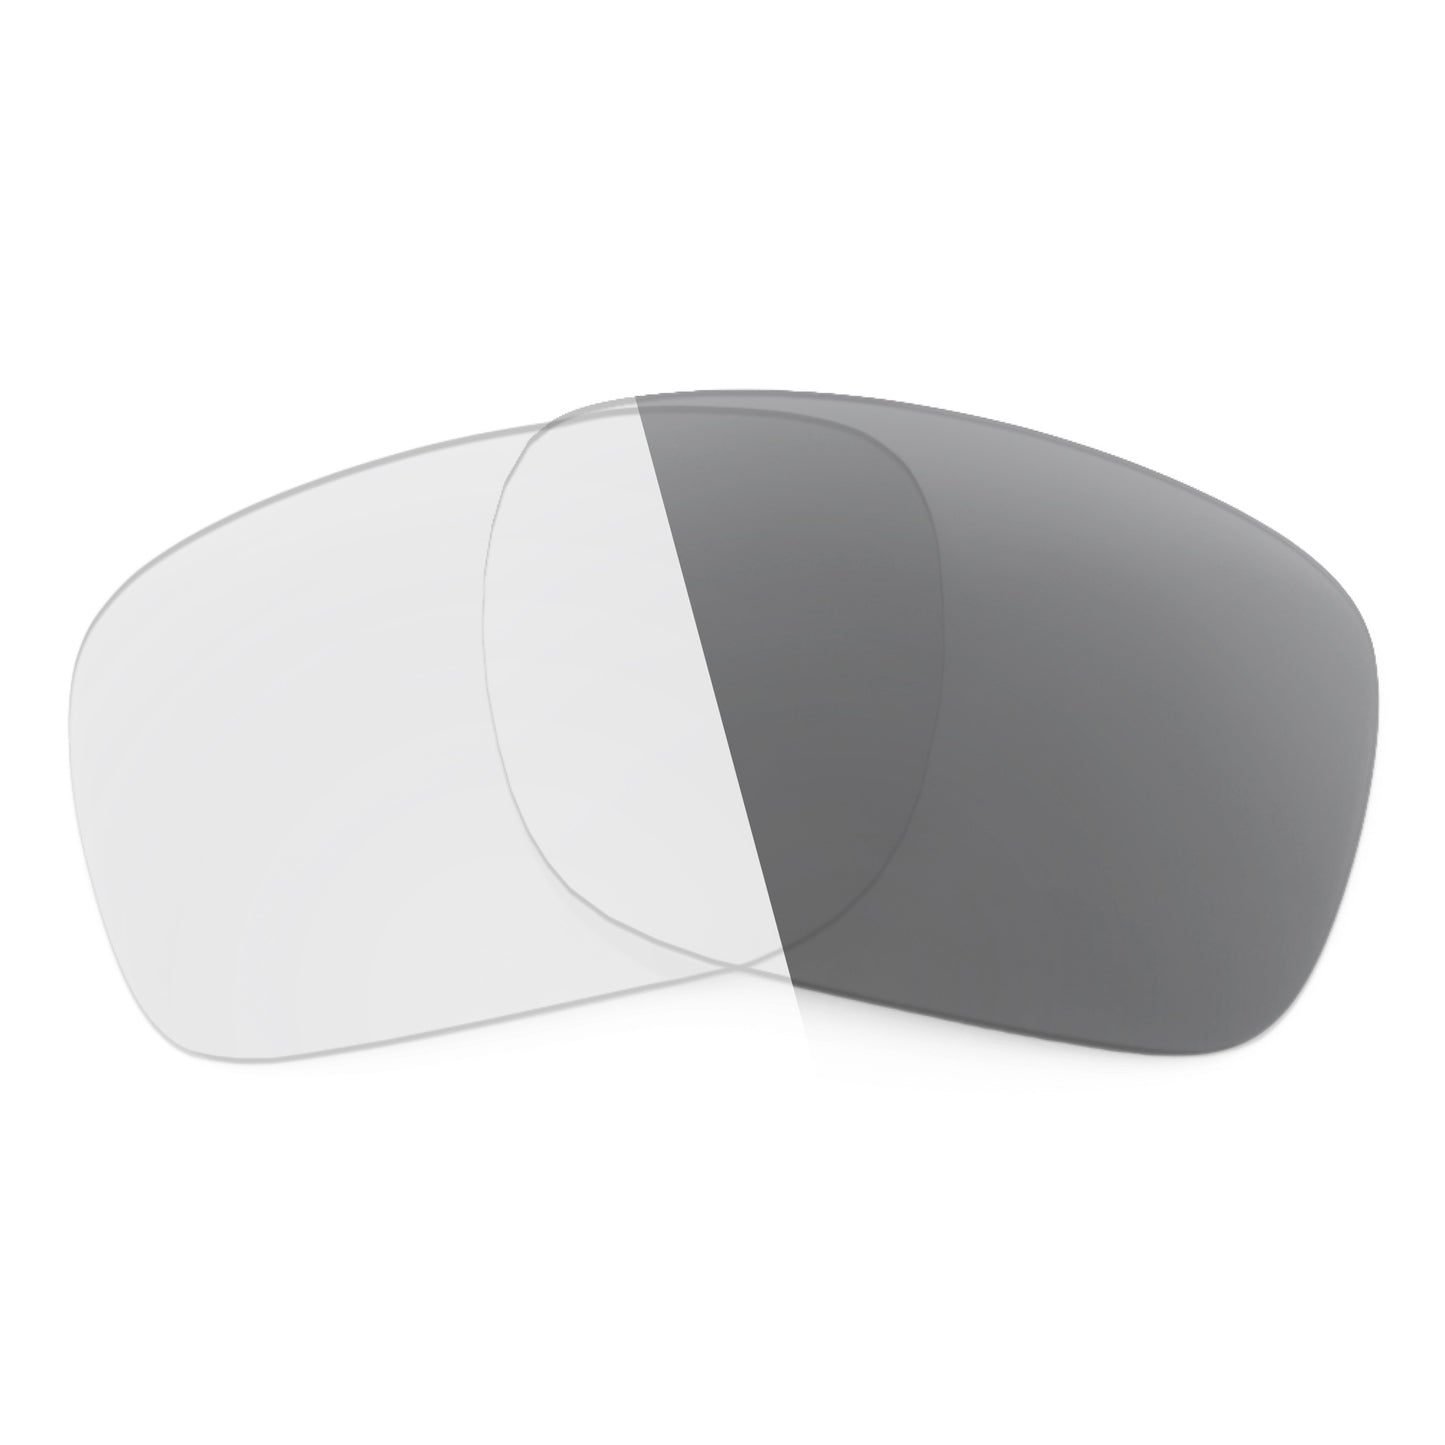 Revant replacement lenses for Ray-Ban RB3516 59mm Non-Polarized Adapt Gray Photochromic